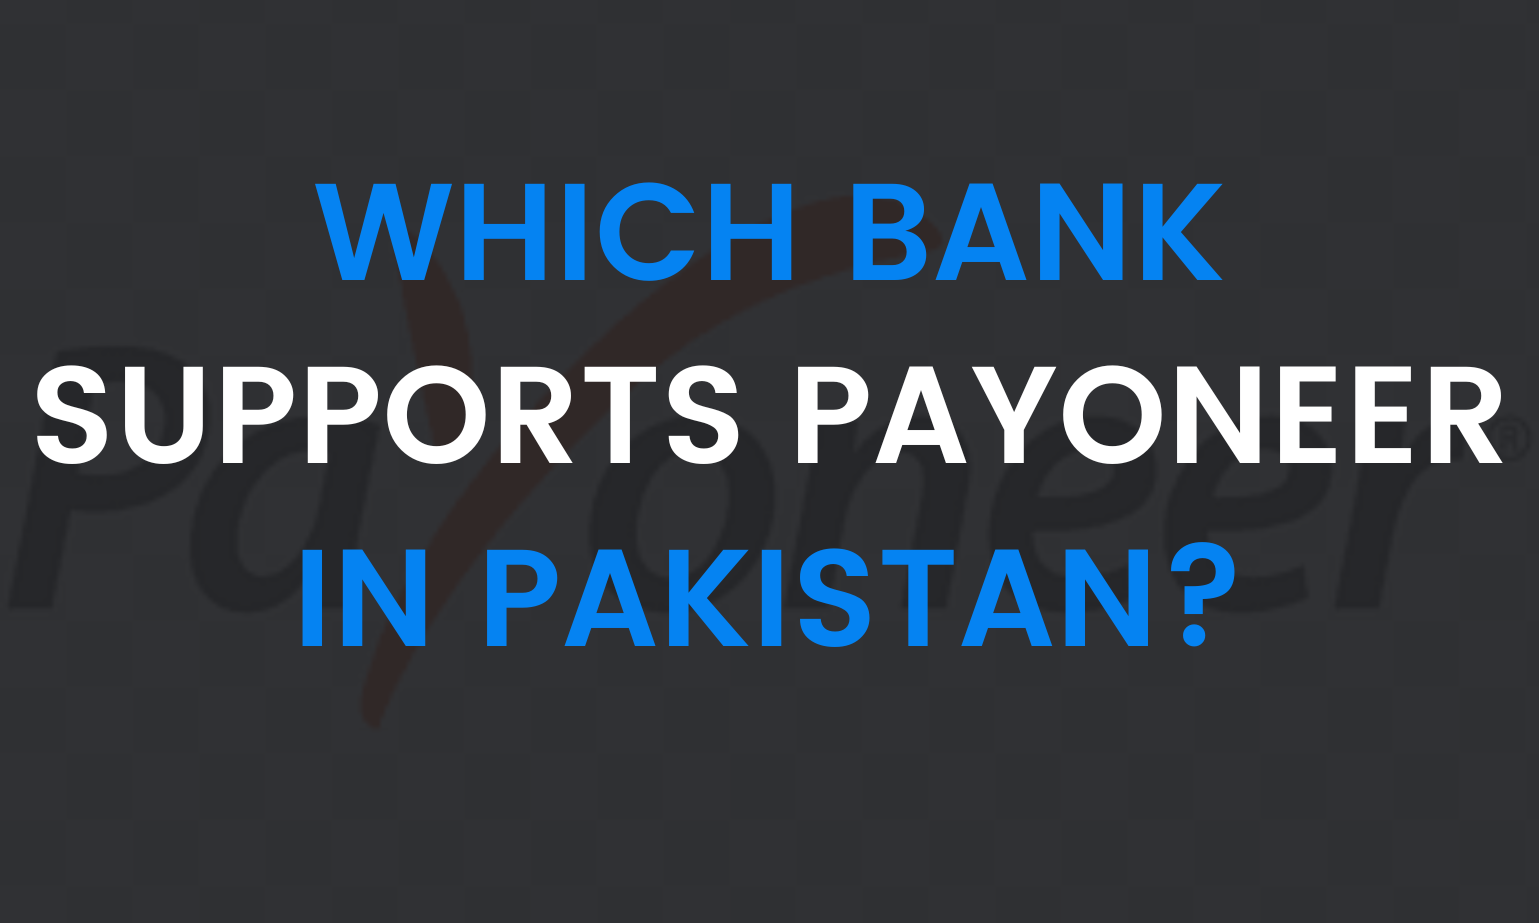 Which Bank Supports Payoneer in Pakistan?